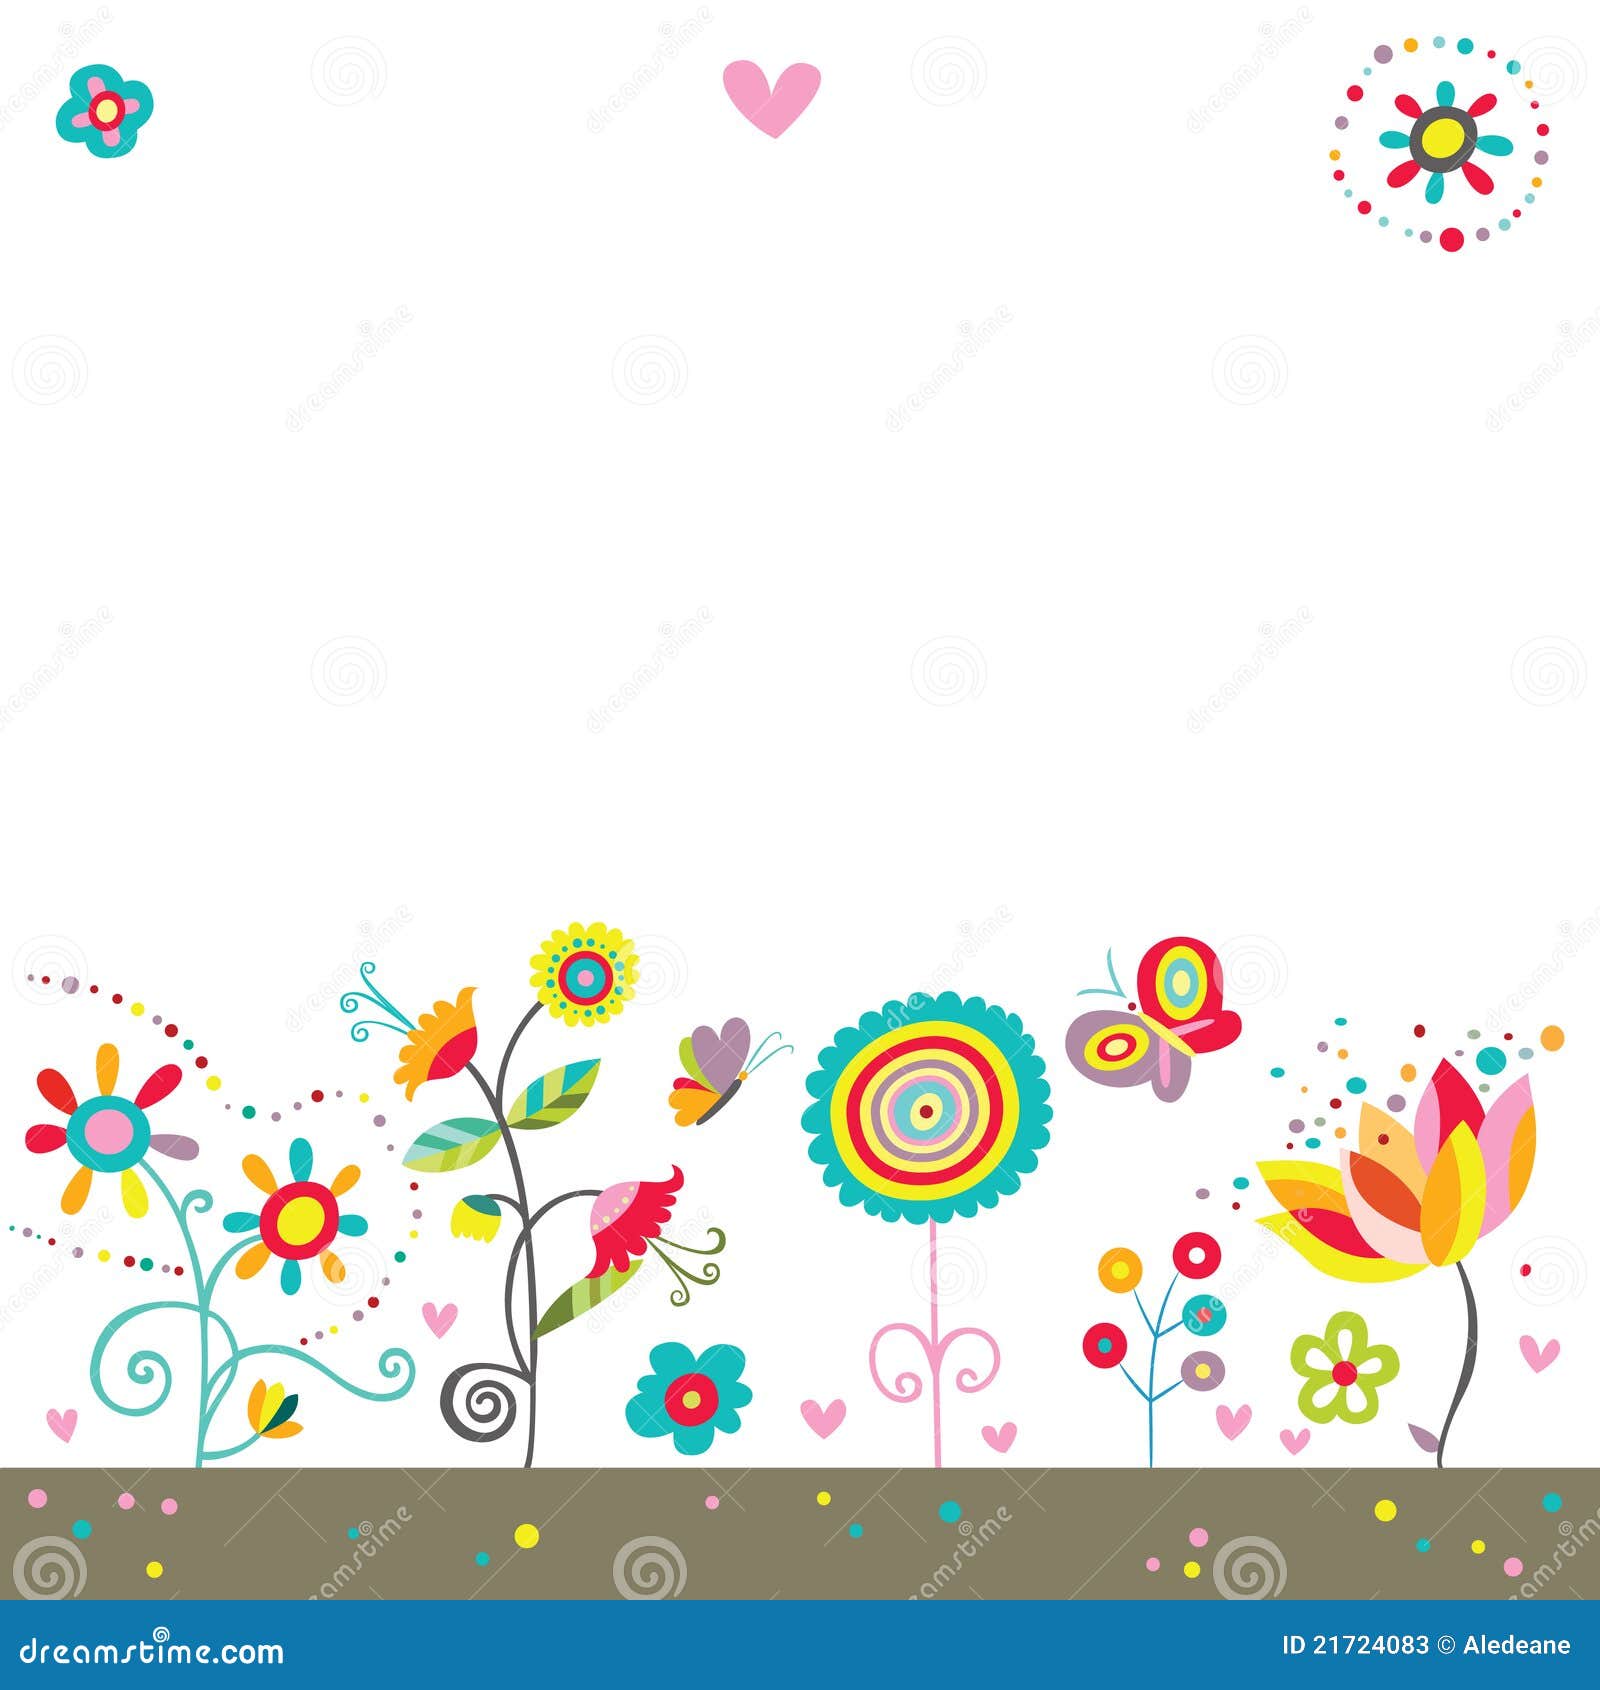 cute colorful background